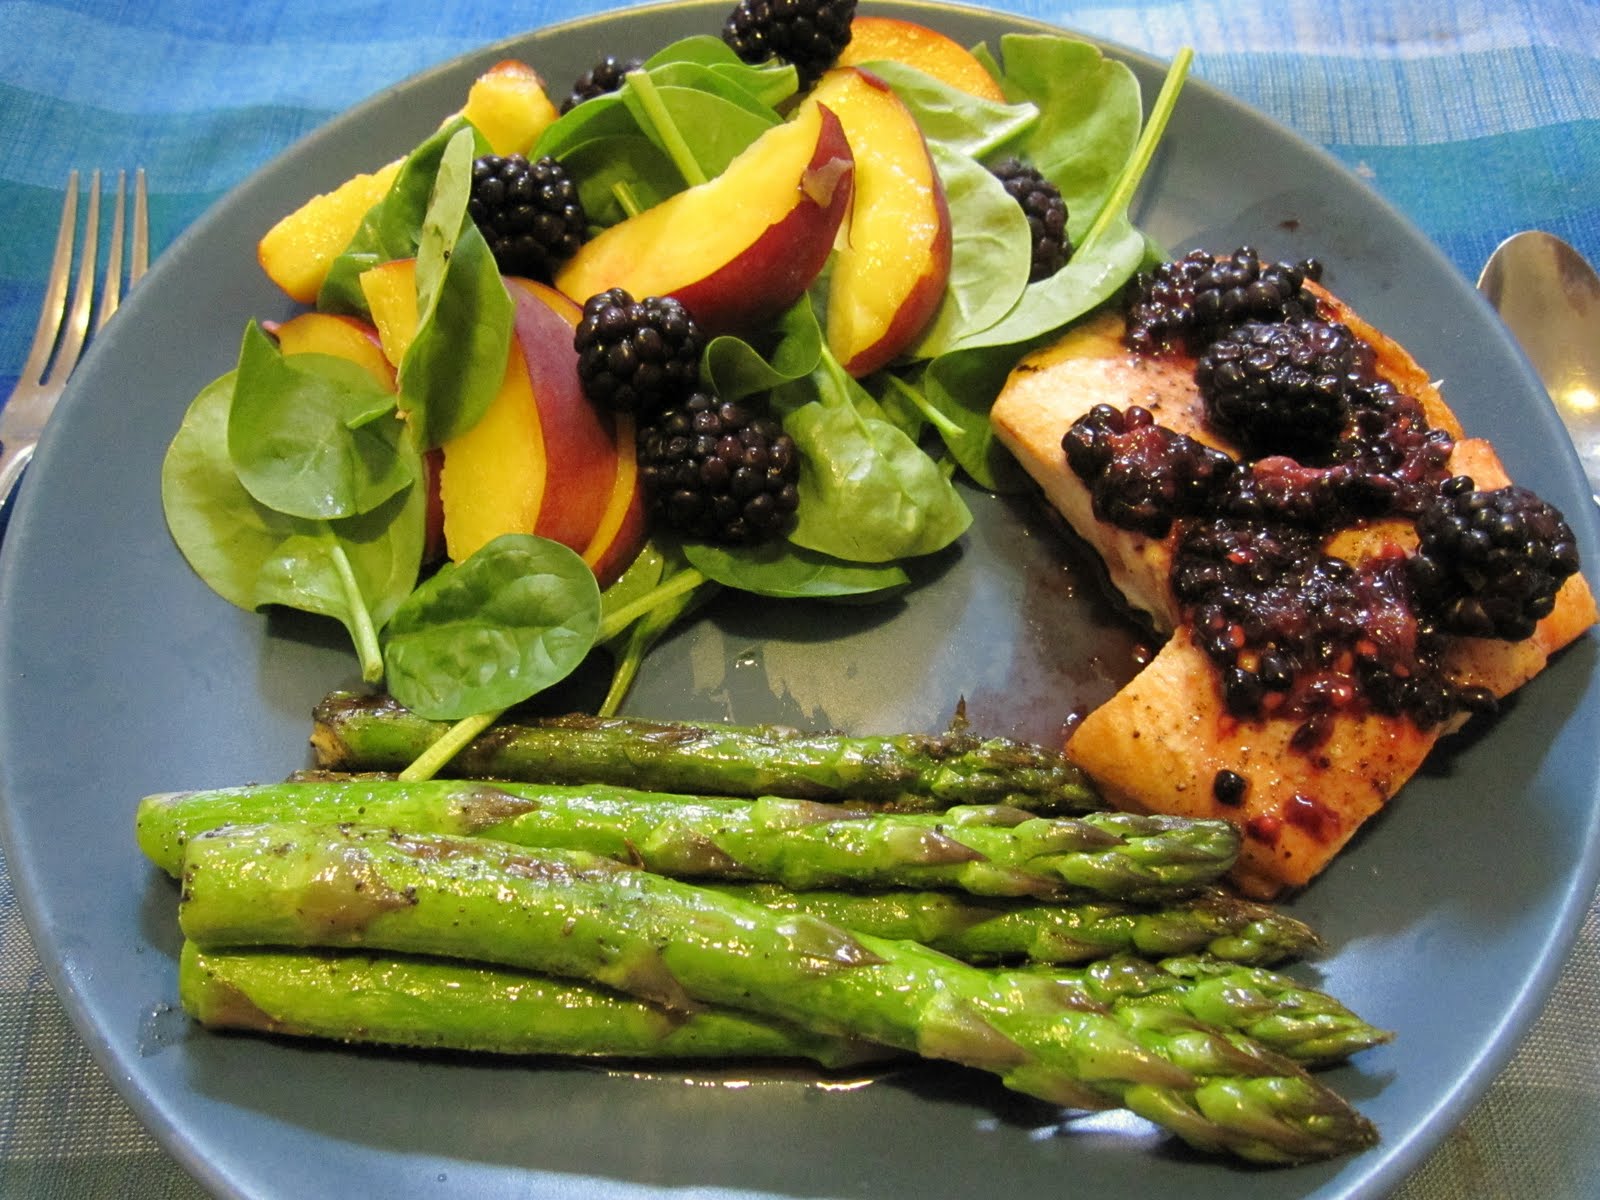 Kitchen Musings: Spinach, Asparagus & Salmon with Blackberry Glaze